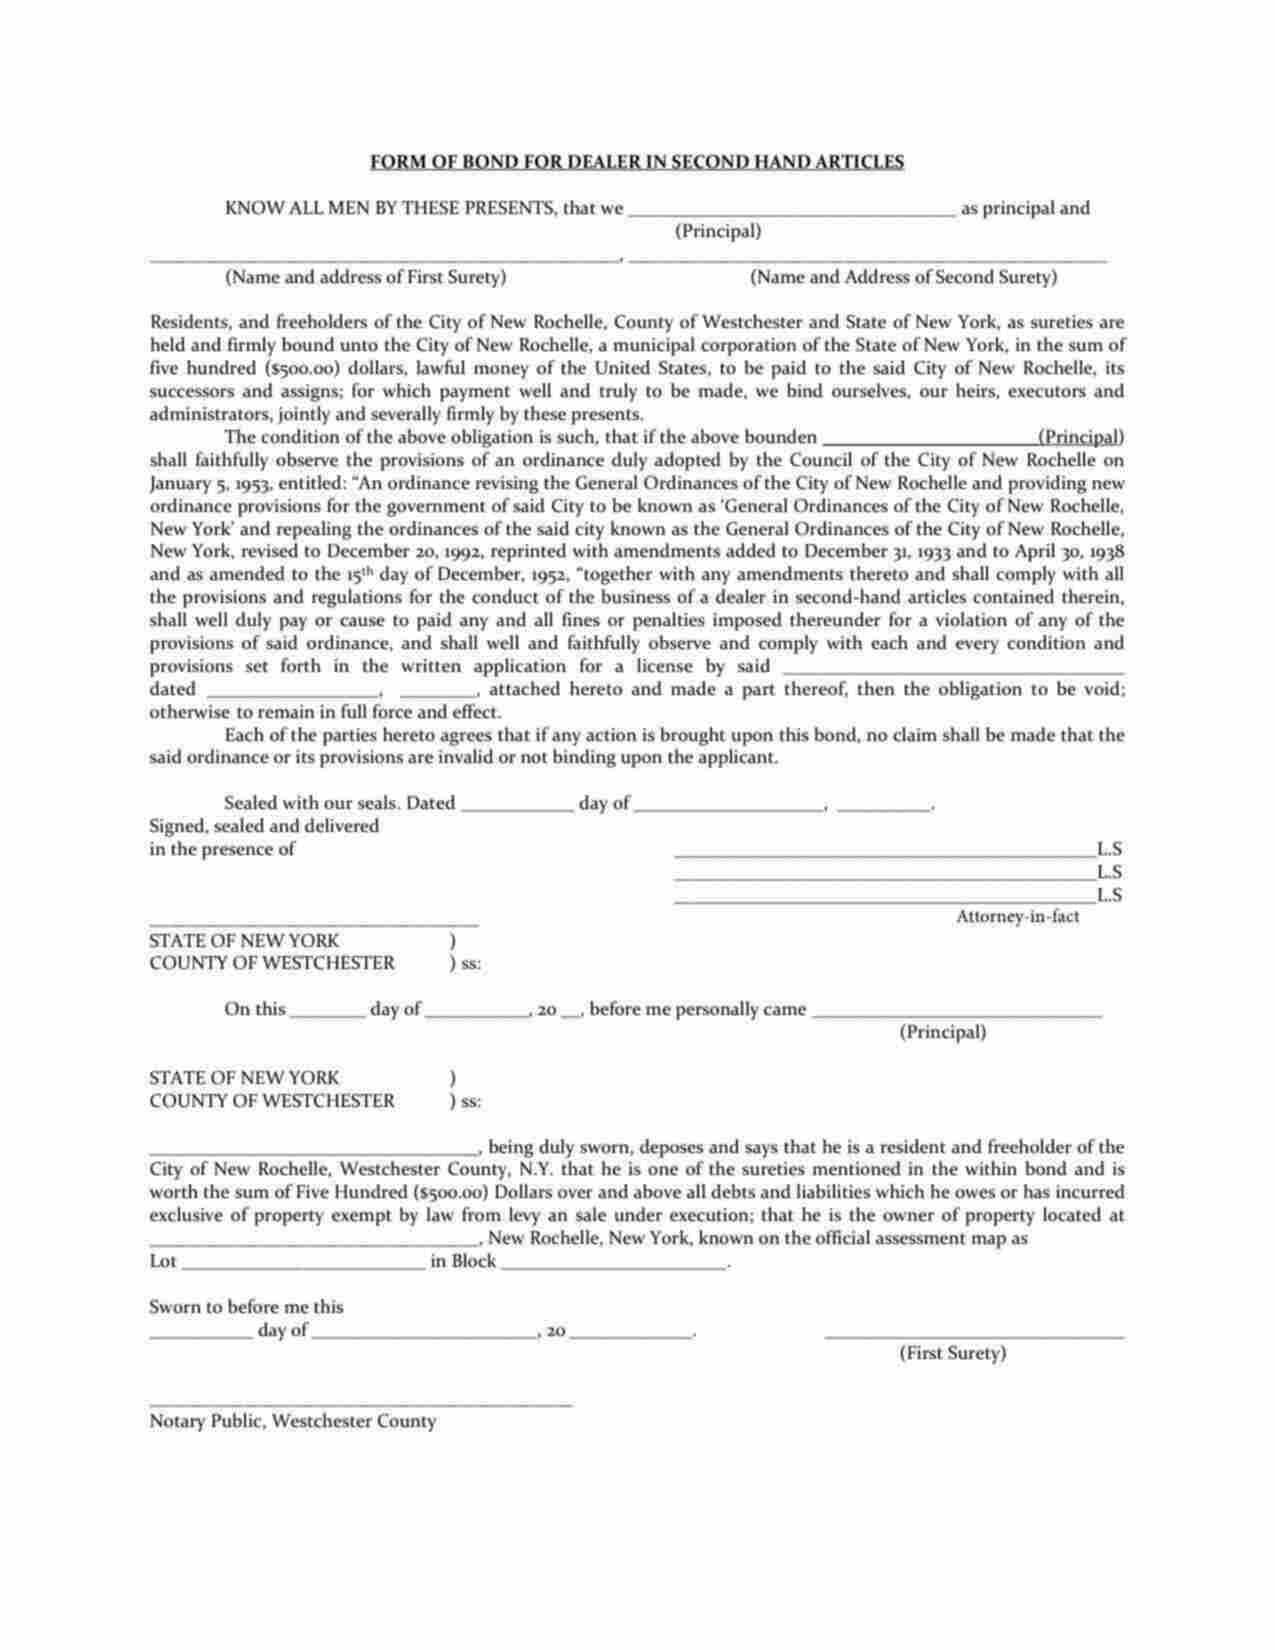 New York Dealer in Second Hand Articles Bond Form